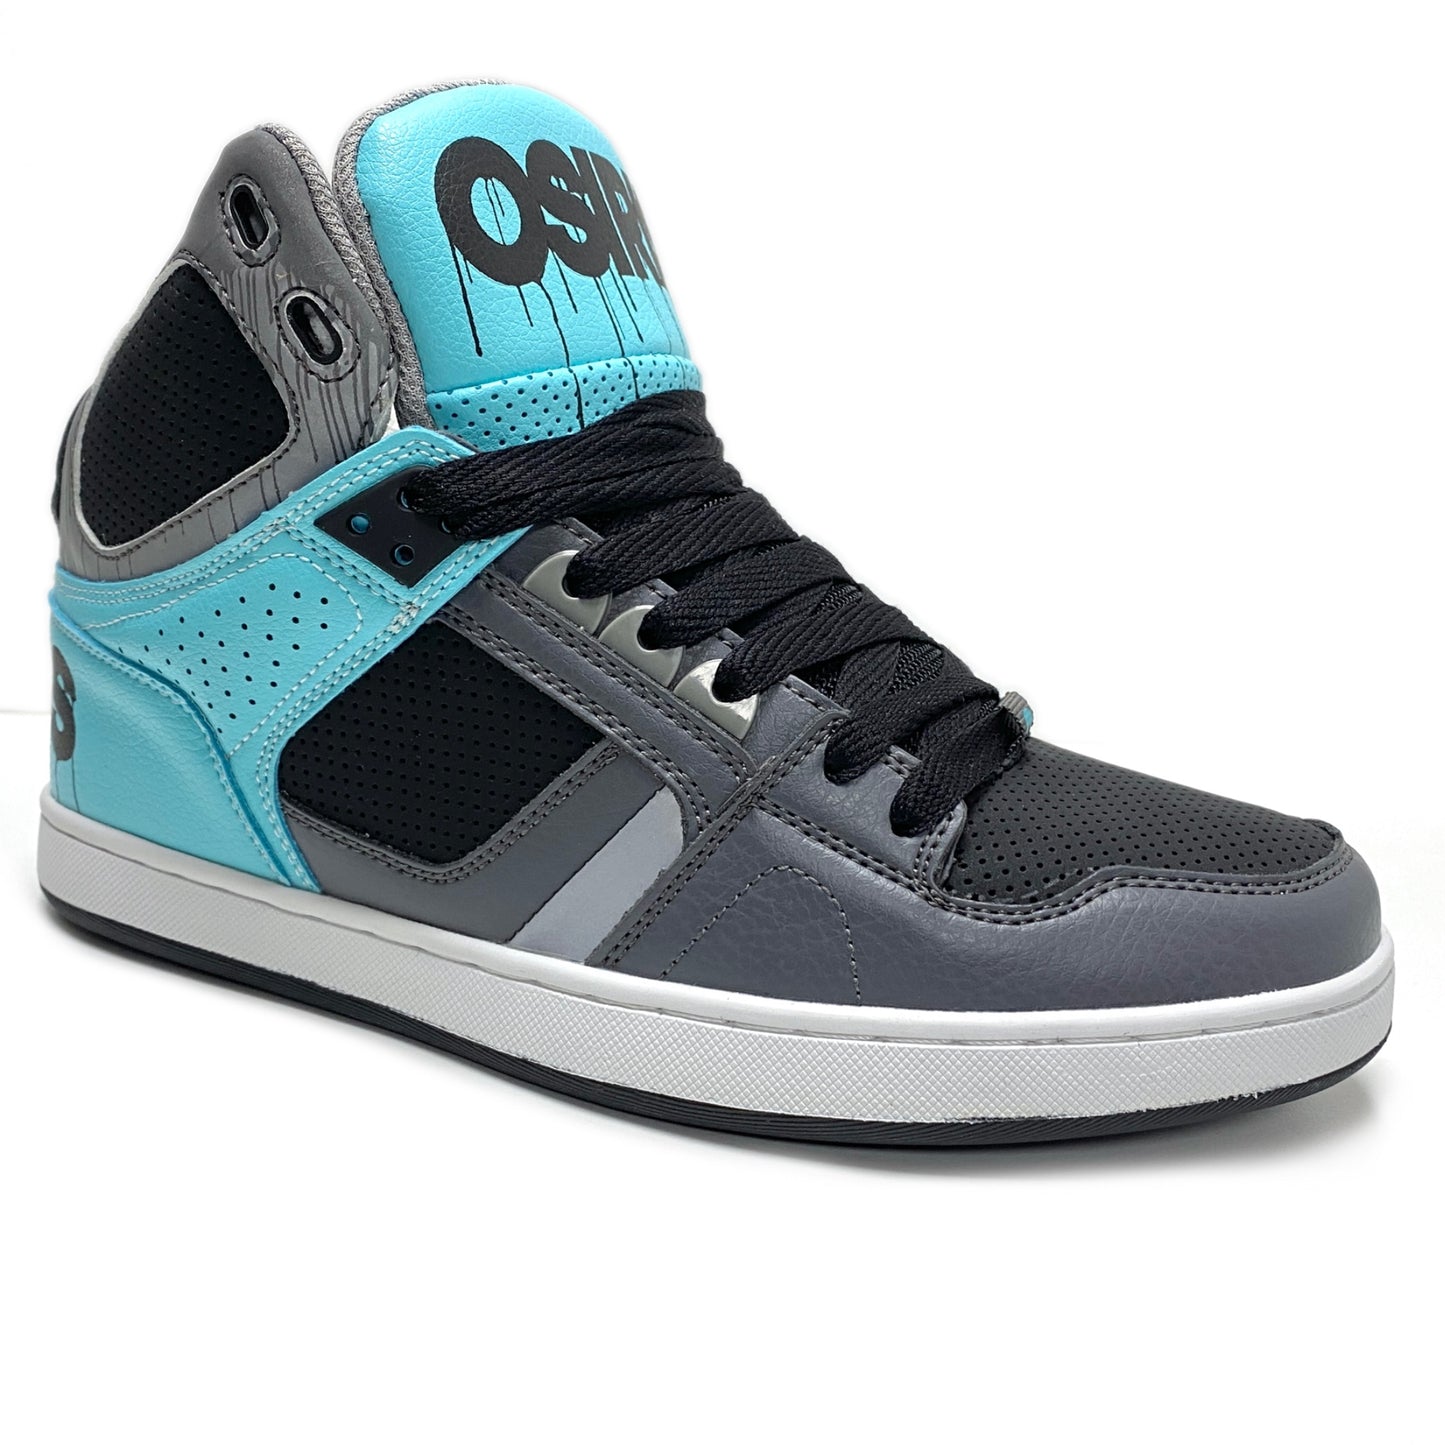 OSIRIS SHOES NYC 83 CLK BLACK TEAL DRIPS TRAINERS